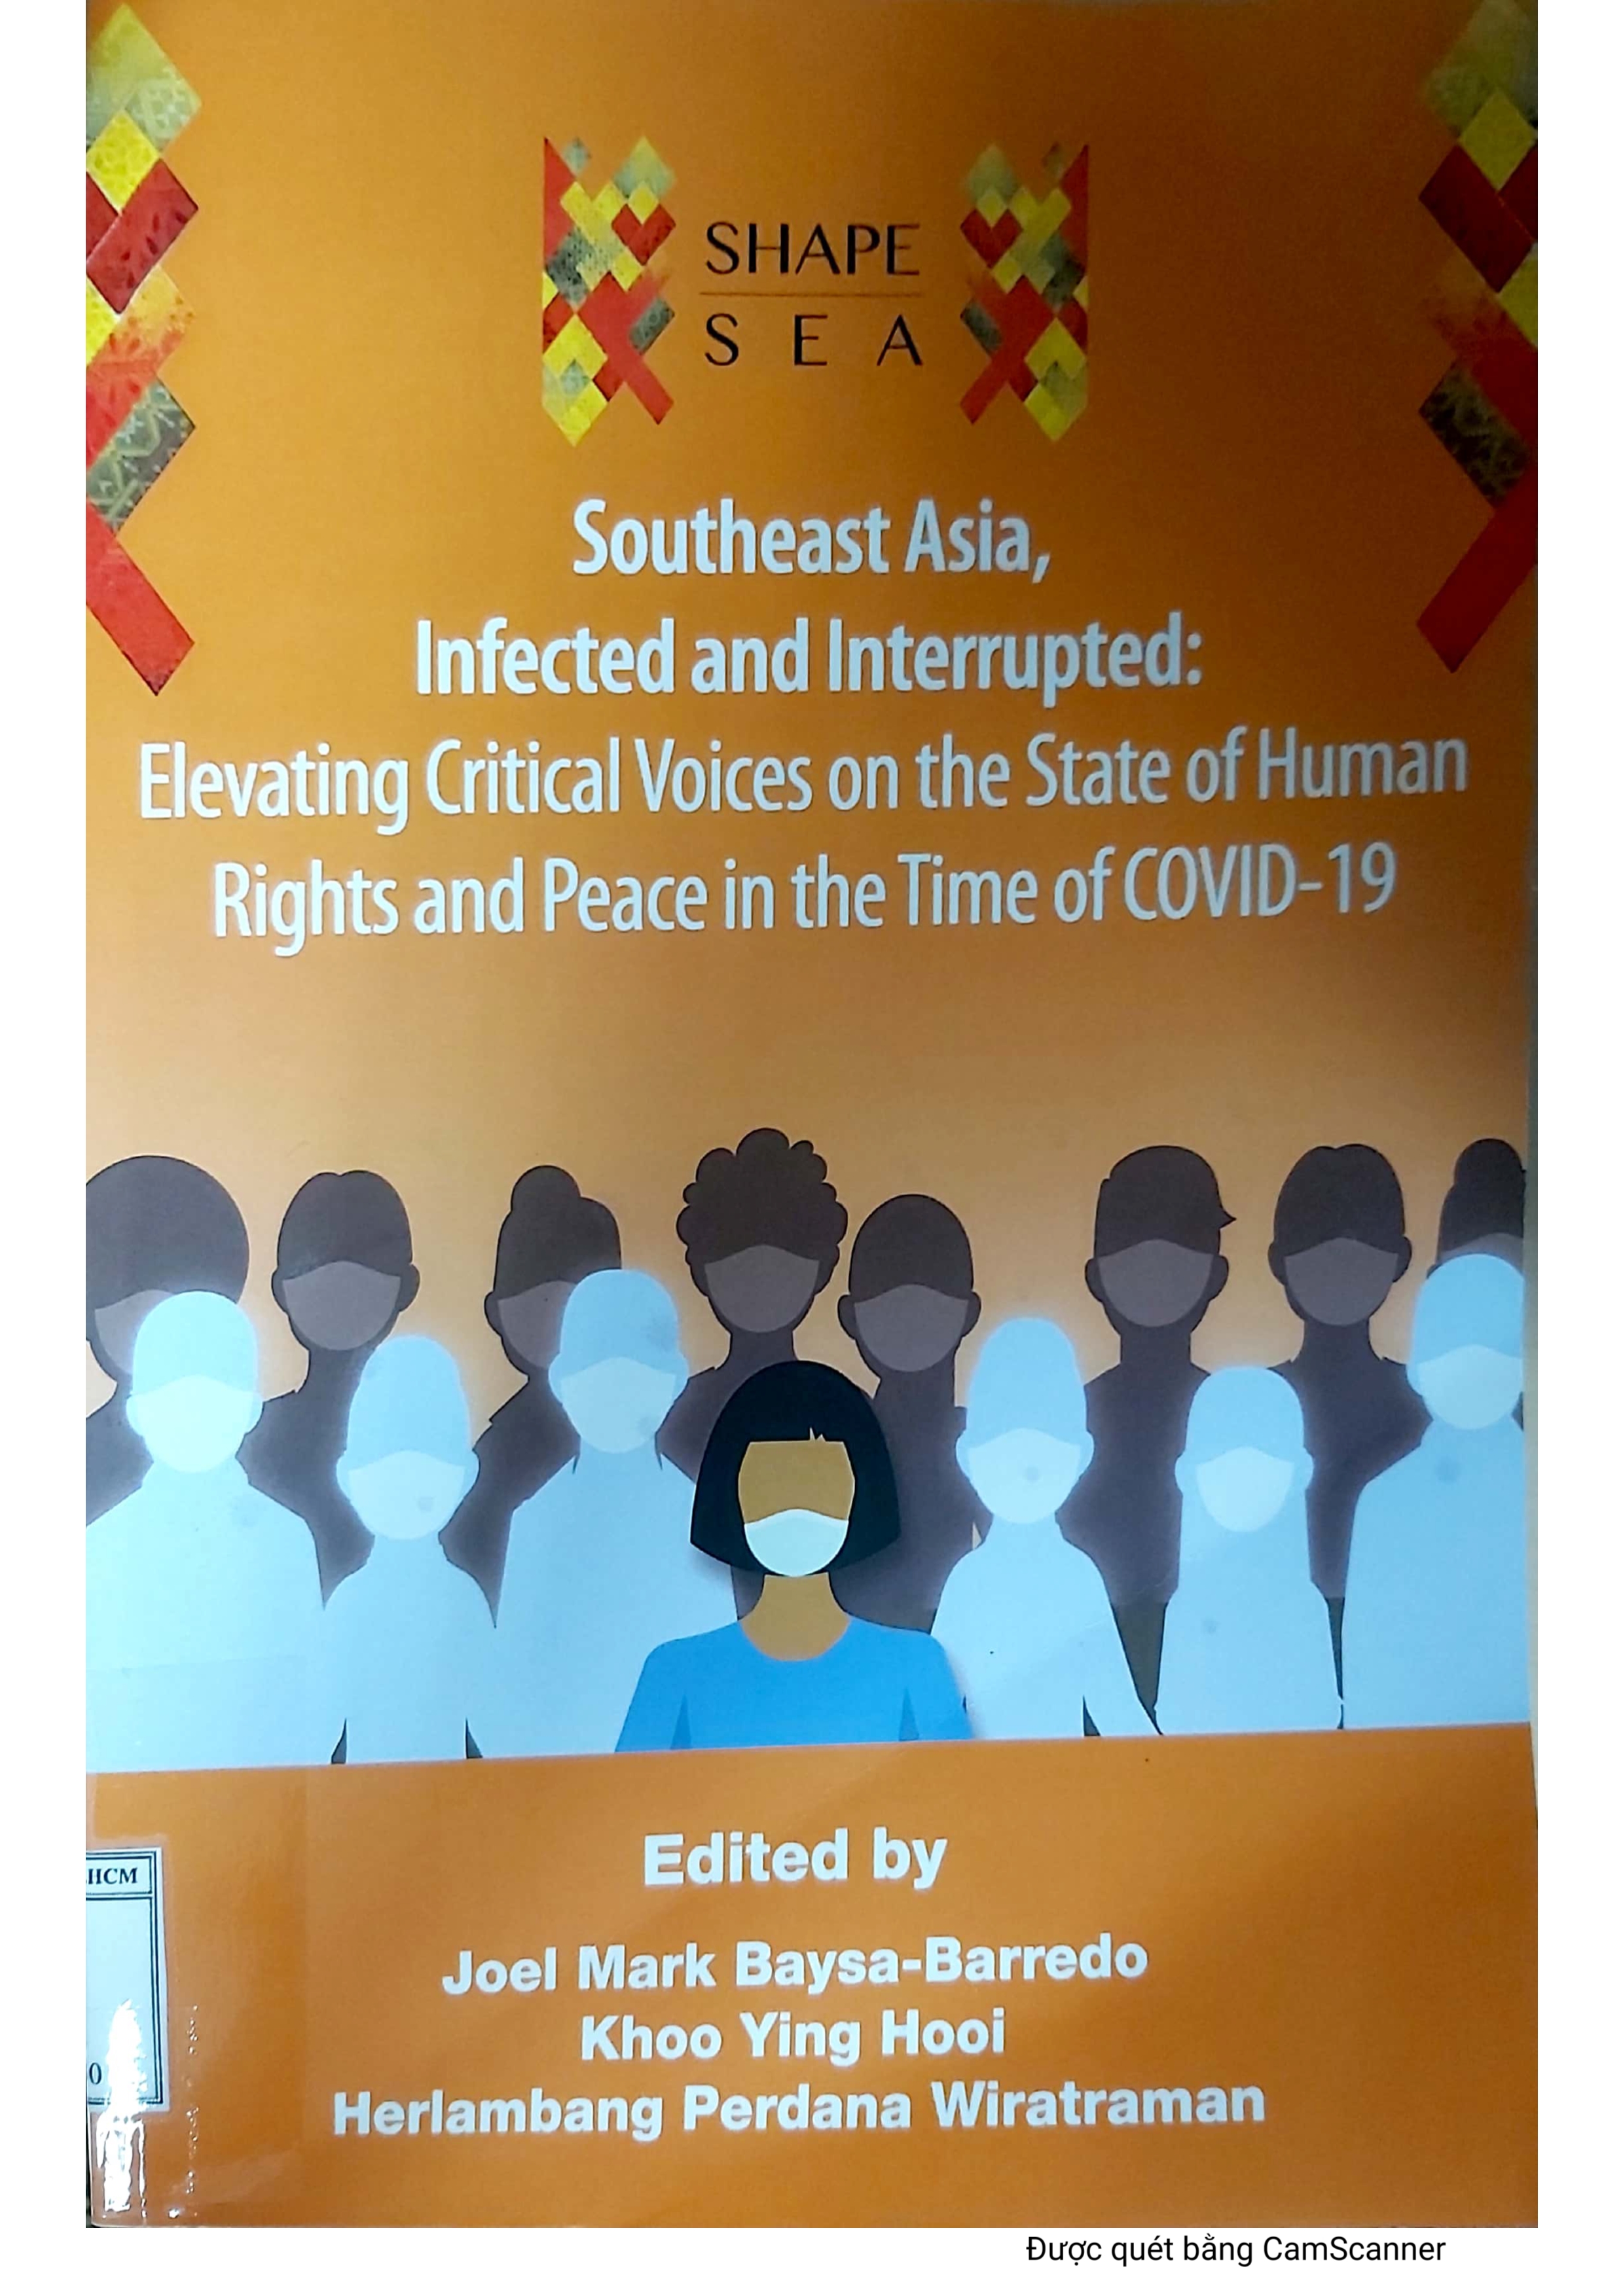 Southeast Asia-Infected and Interrupted Elevating Critical Voices on the State of Human Rights and Peace in the Time of COVID-19